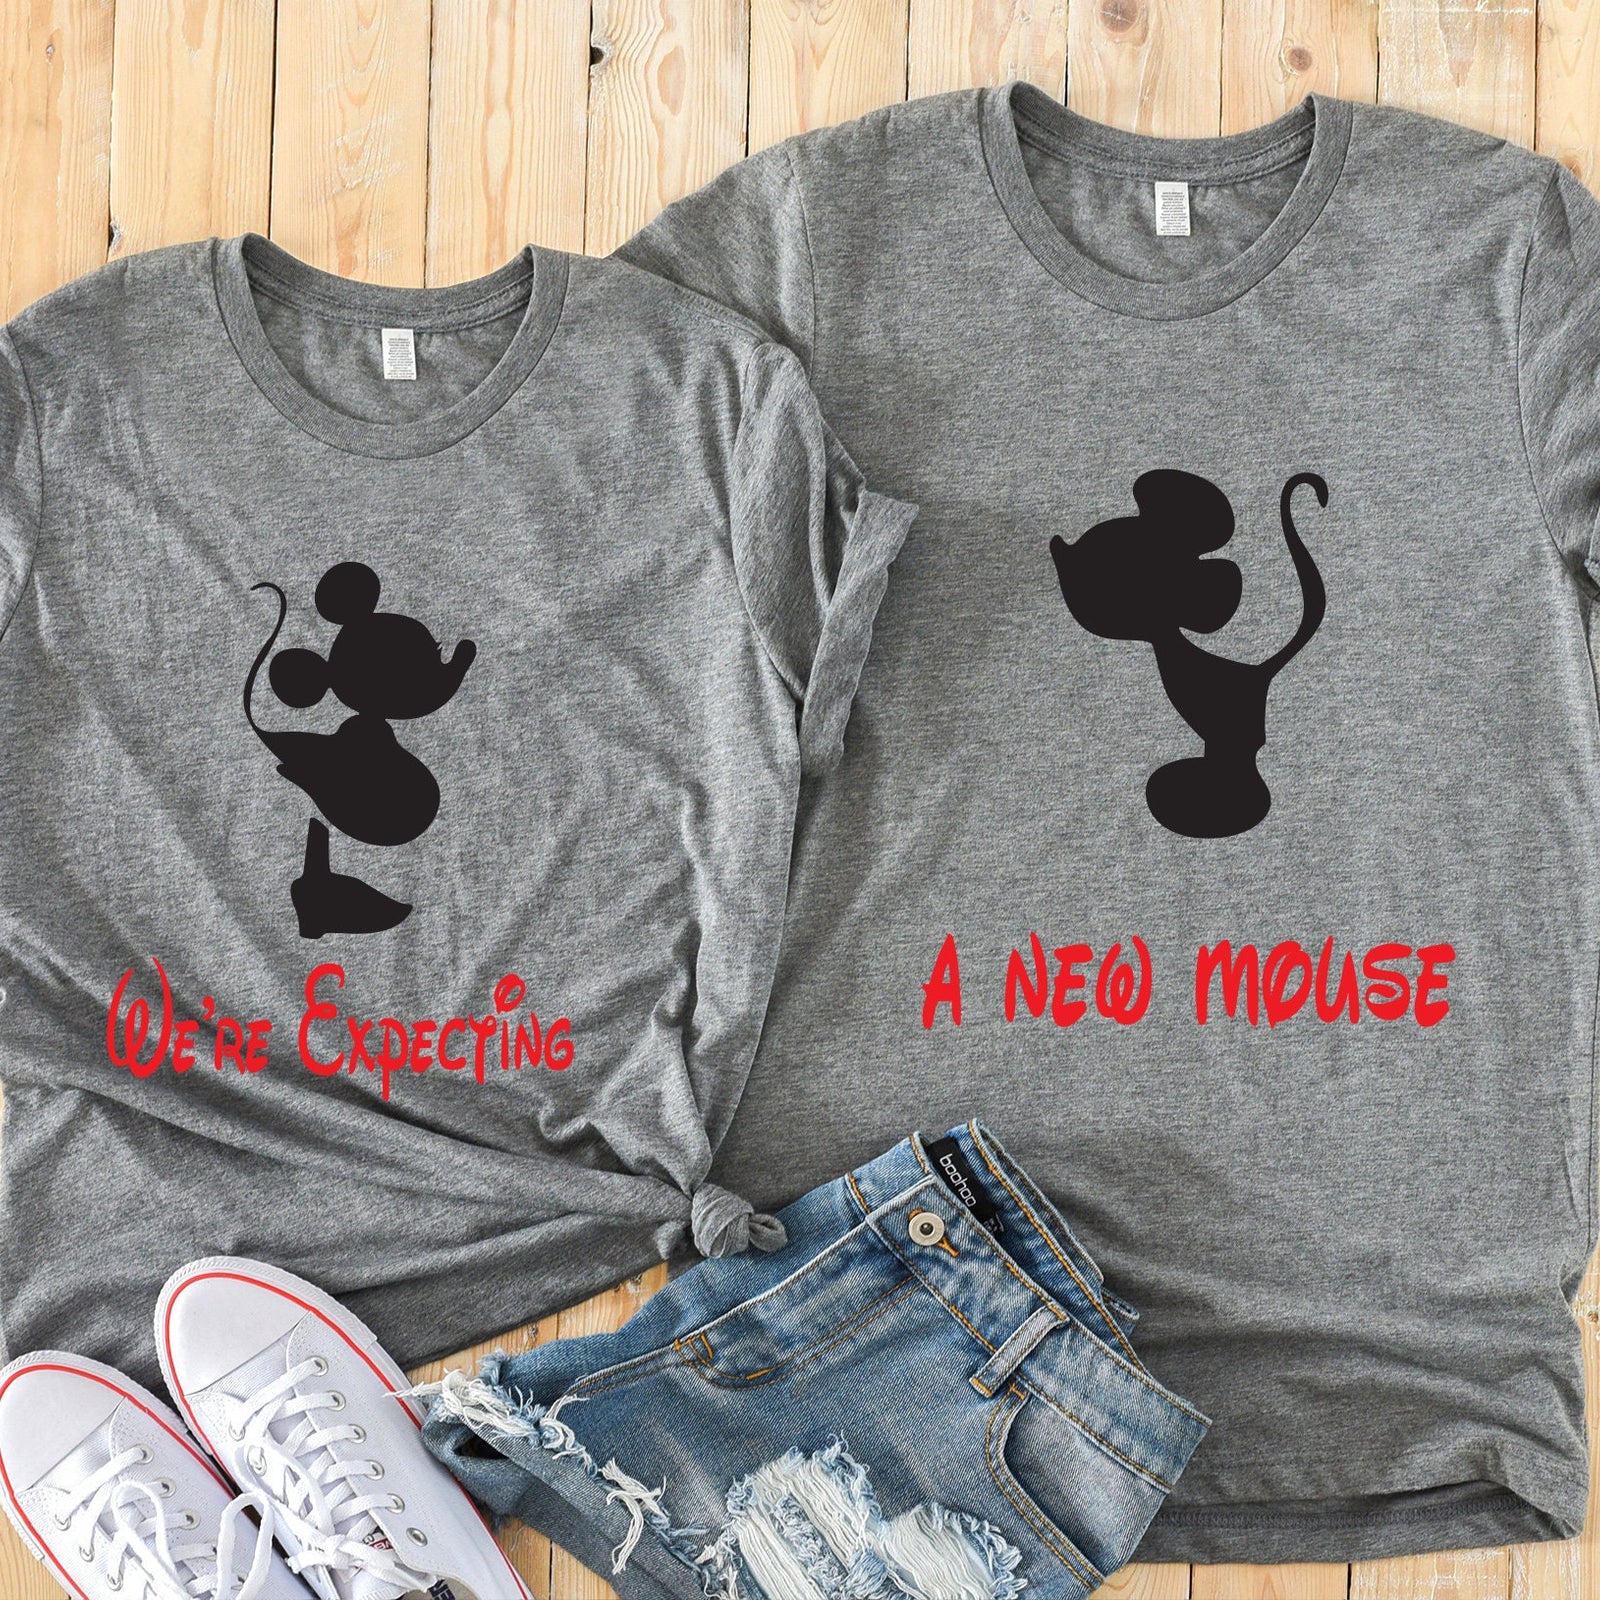 We Are Expecting a New Mouse Pregnant Minnie - Disney Parents Shirt - Couples Matching Disney Shirts - Pregnancy Announcement Shirt